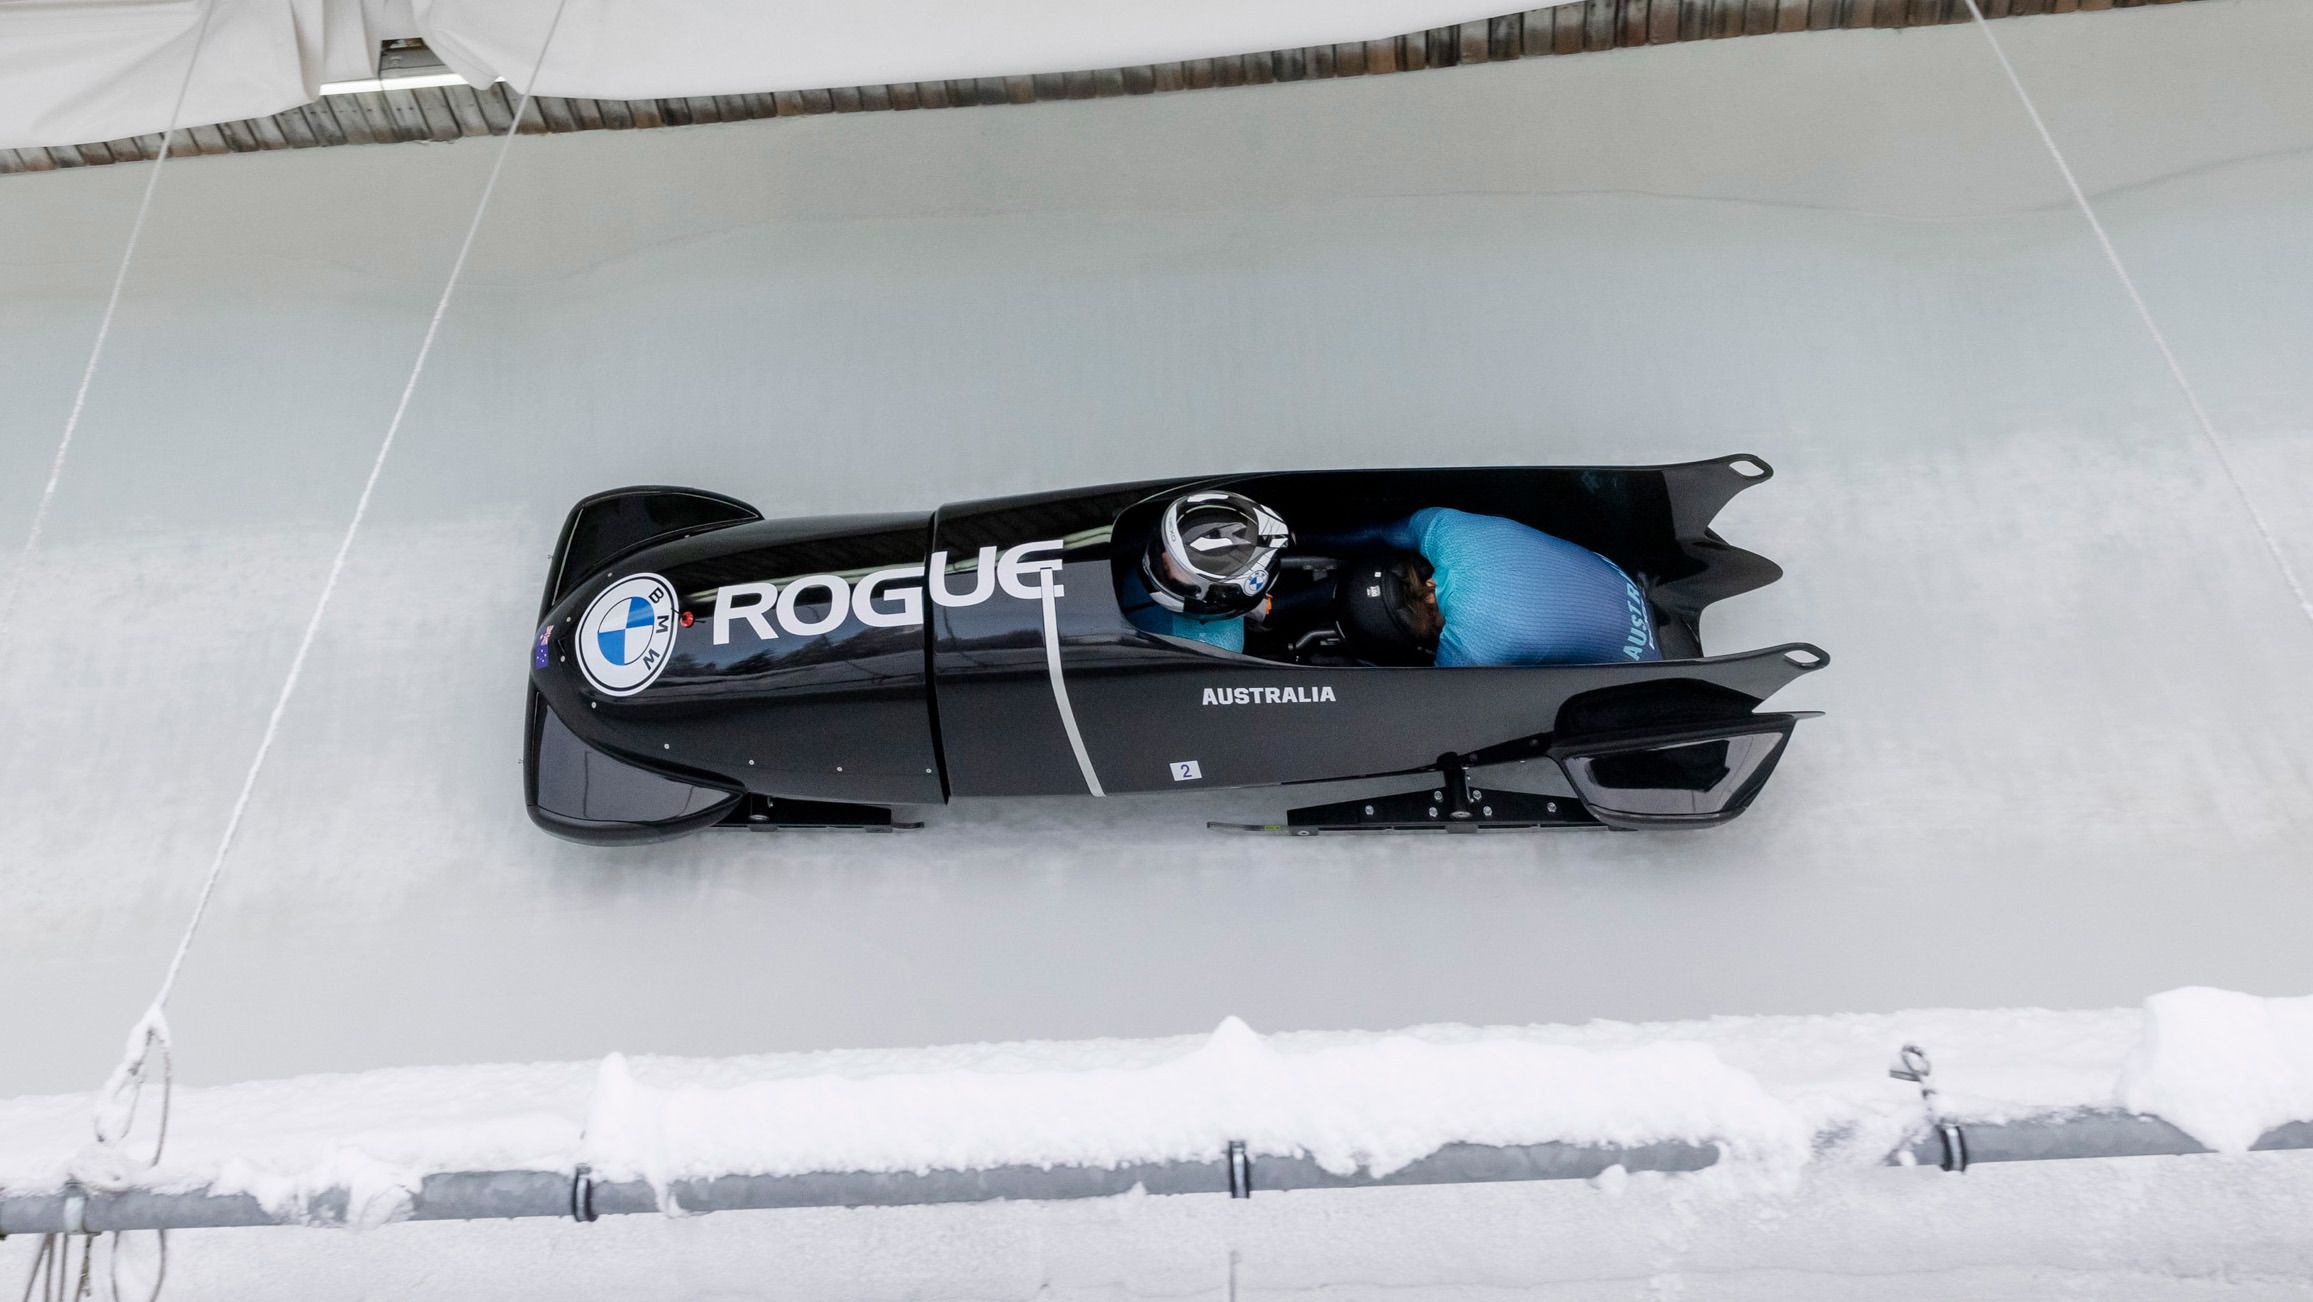 Ashleigh Werner and Kiara Reddingius of Australia compete during the first run of the 2-woman bobsleigh competition of the IBSF Bob and Skeleton World Cup at Olympiabobbahn Igls on November 28, 2021 in Innsbruck, Austria. (Photo by Jan Hetfleisch/Getty Images)